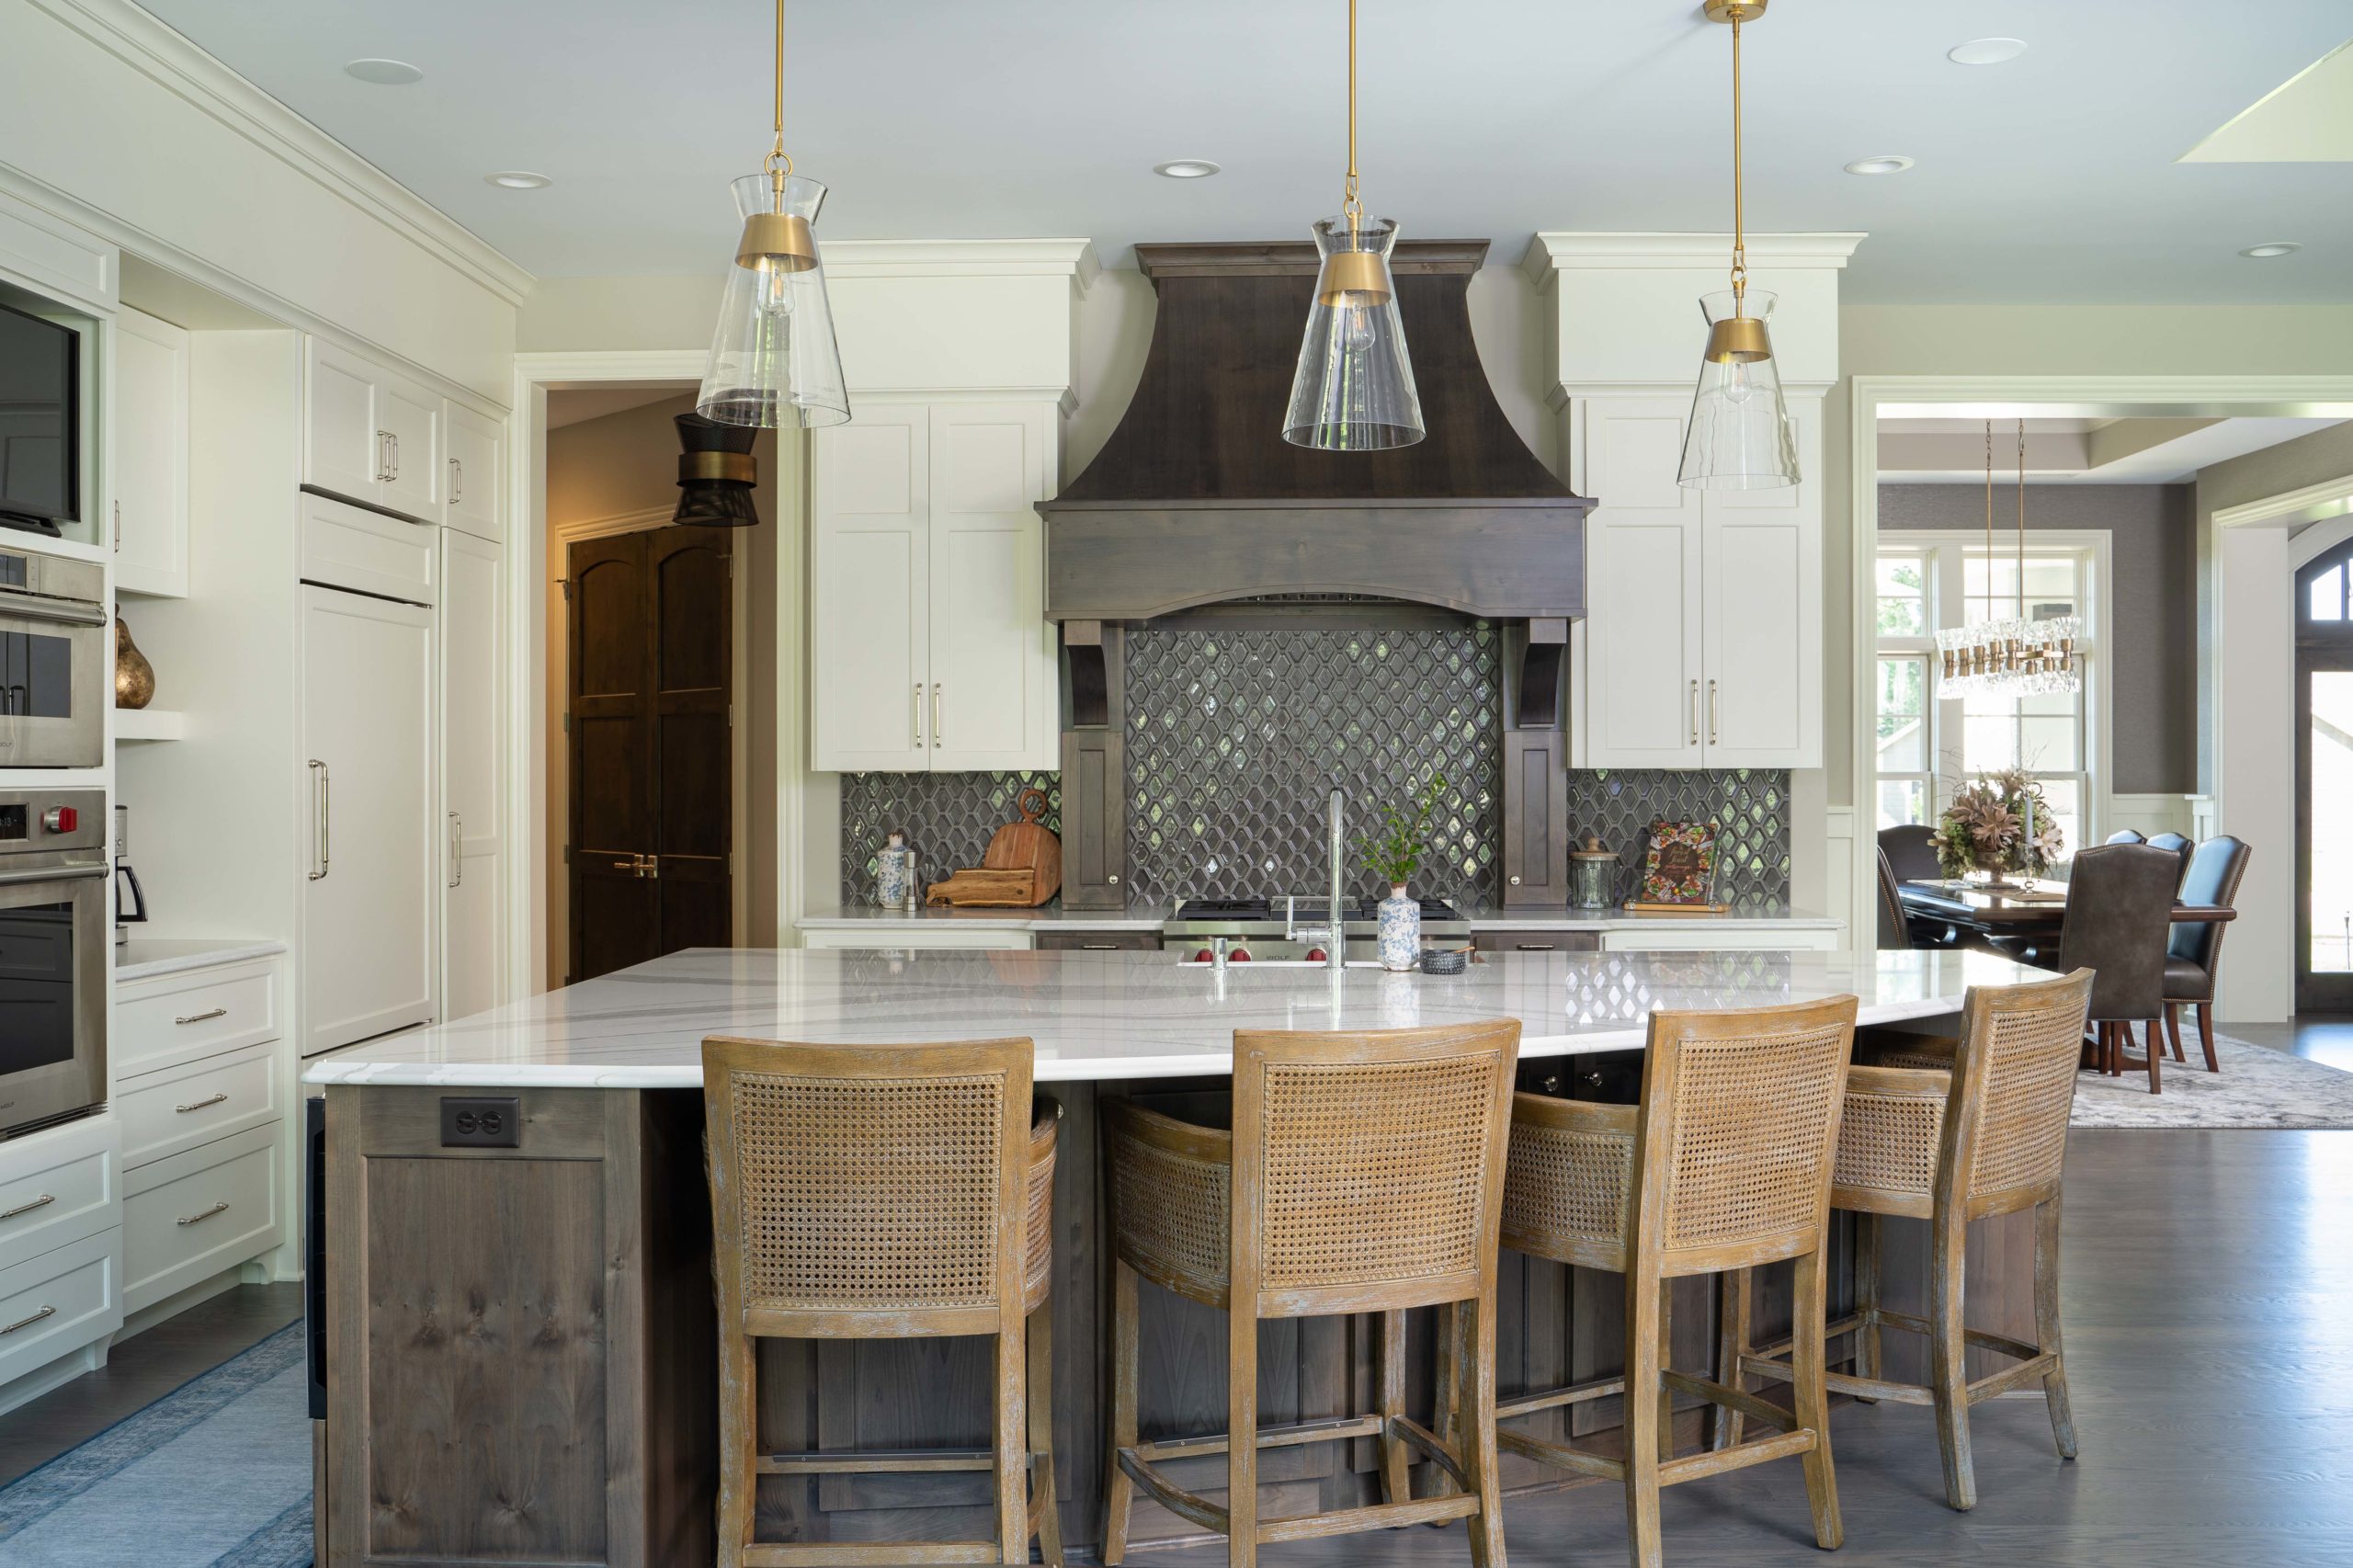 The Lake Escape custom home remodel with a kitchen featuring a center island and bar stools.